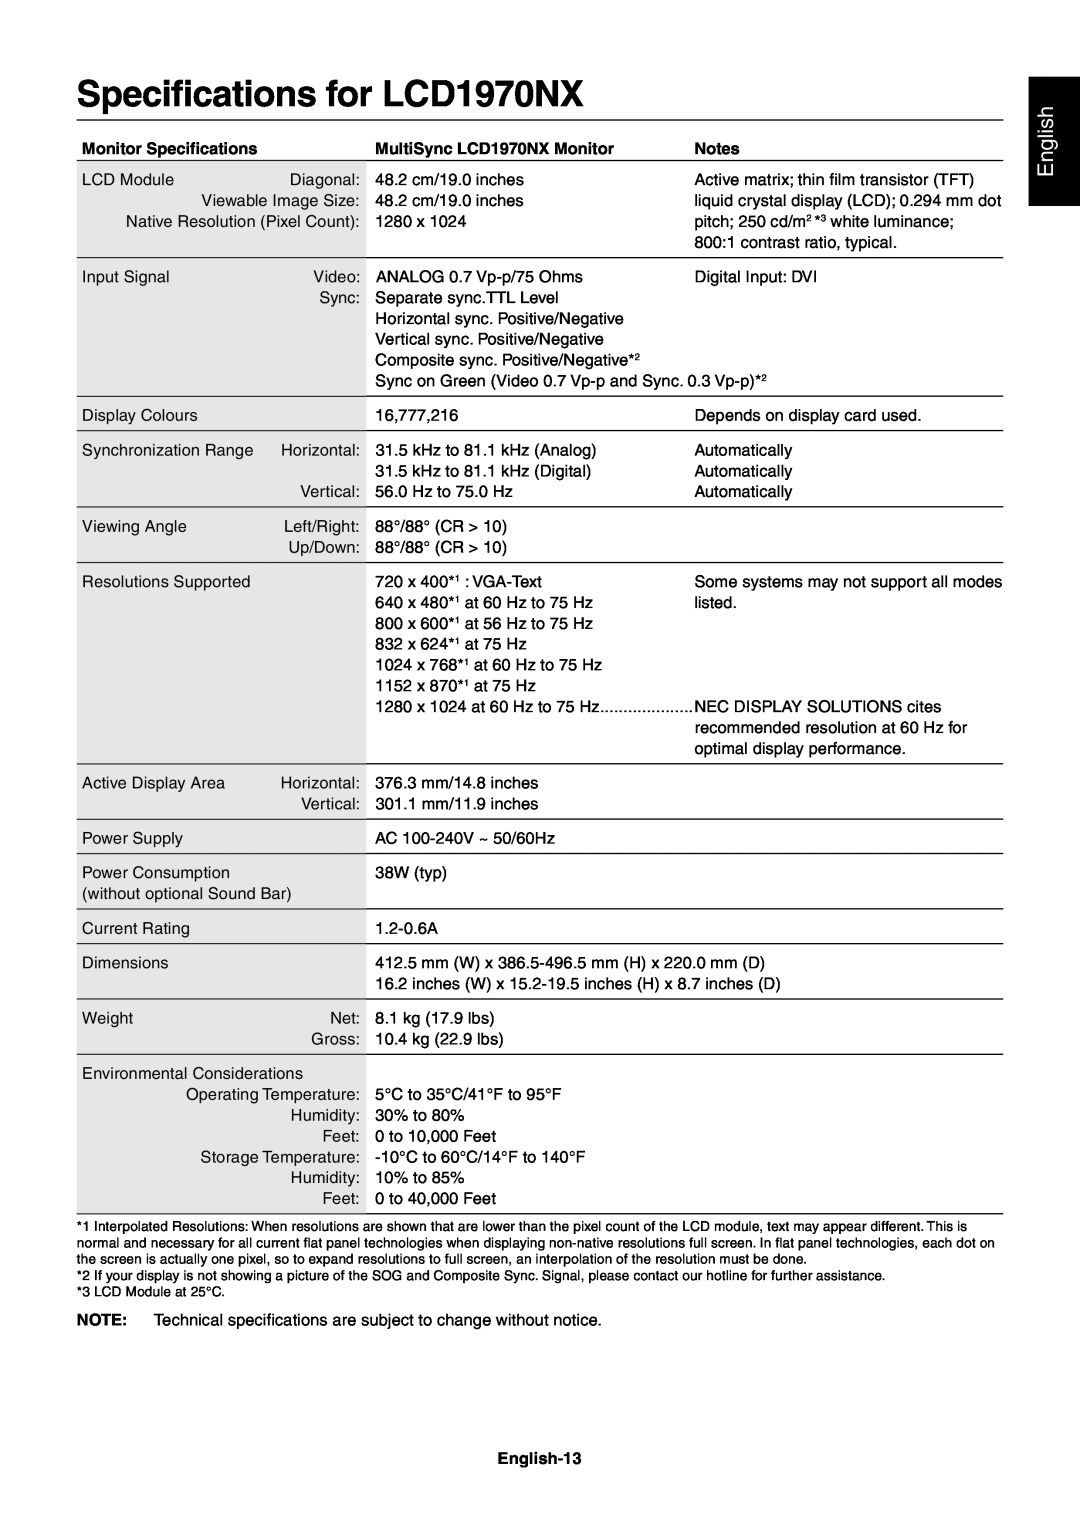 NEC LCD1970VX user manual Specifications for LCD1970NX, English, Monitor Specifications, MultiSync LCD1970NX Monitor, Notes 